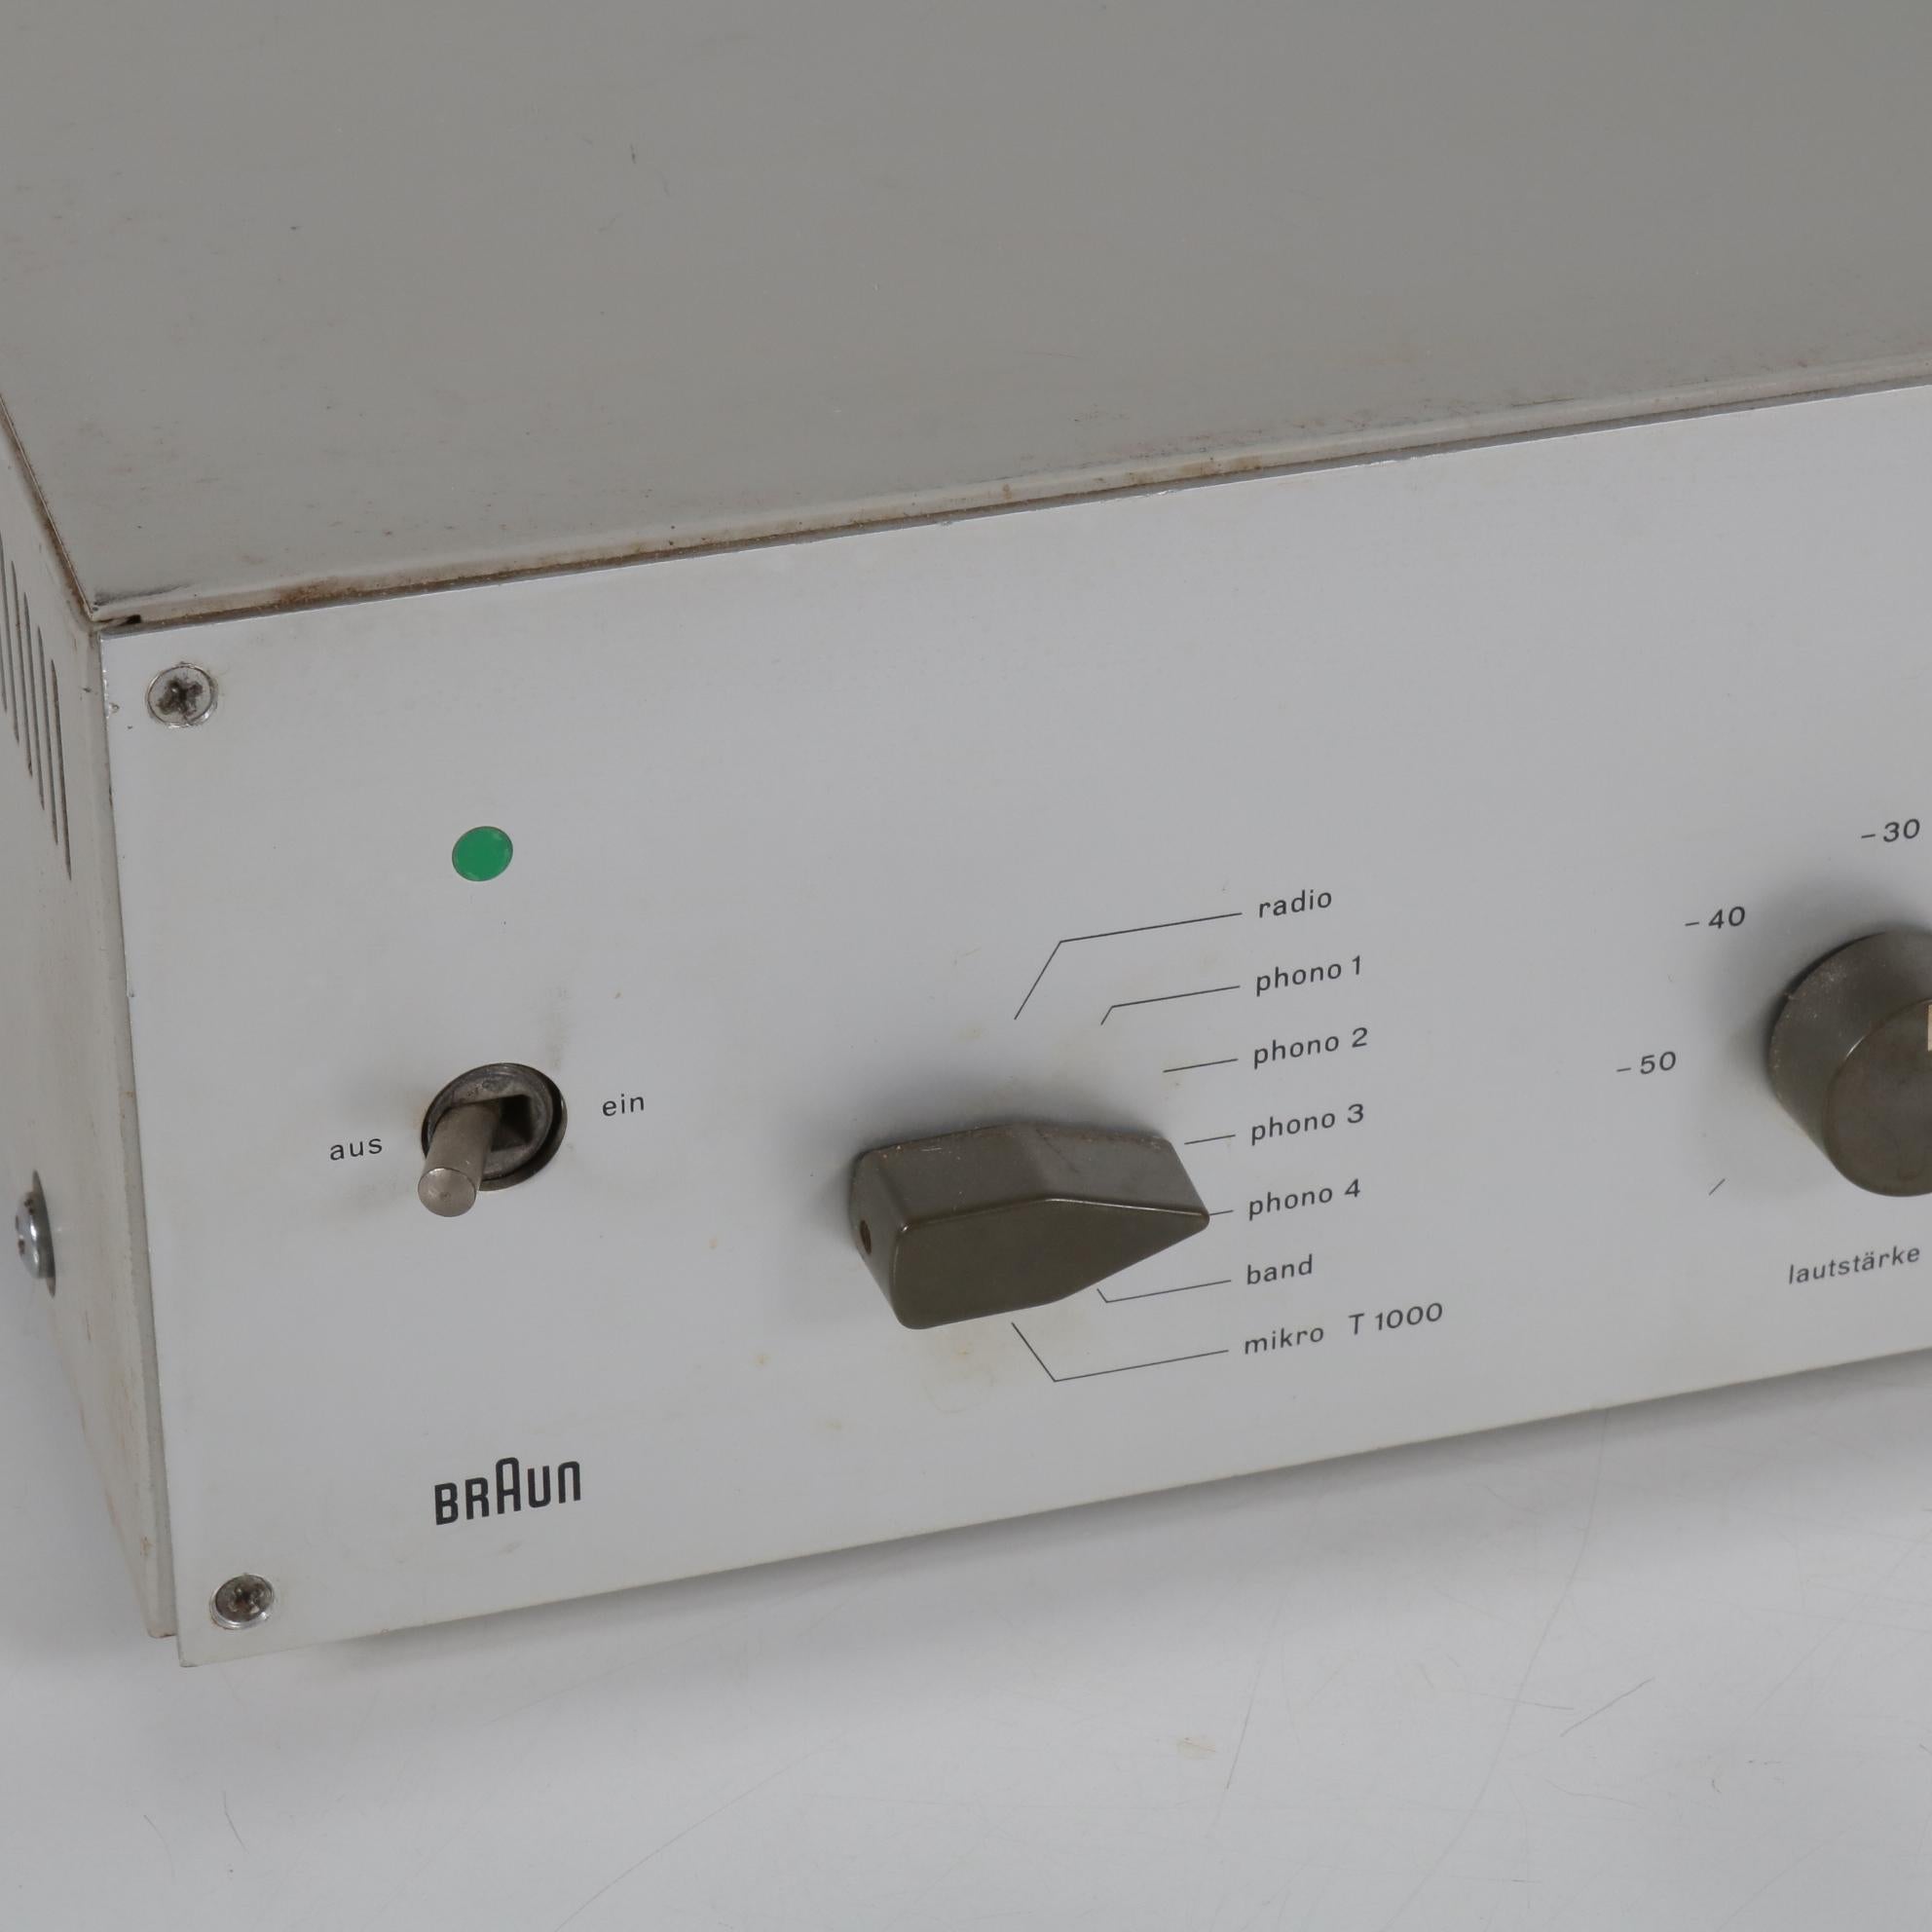 A rare vintage CSV 60/1 tube amplifier designed by Dieter Rams, manufactured by Braun in Germany around 1960.

Made of metallic white / grey lacquered metal this piece is a wonderful piece of retro musical technology. It has a modern, minimalist